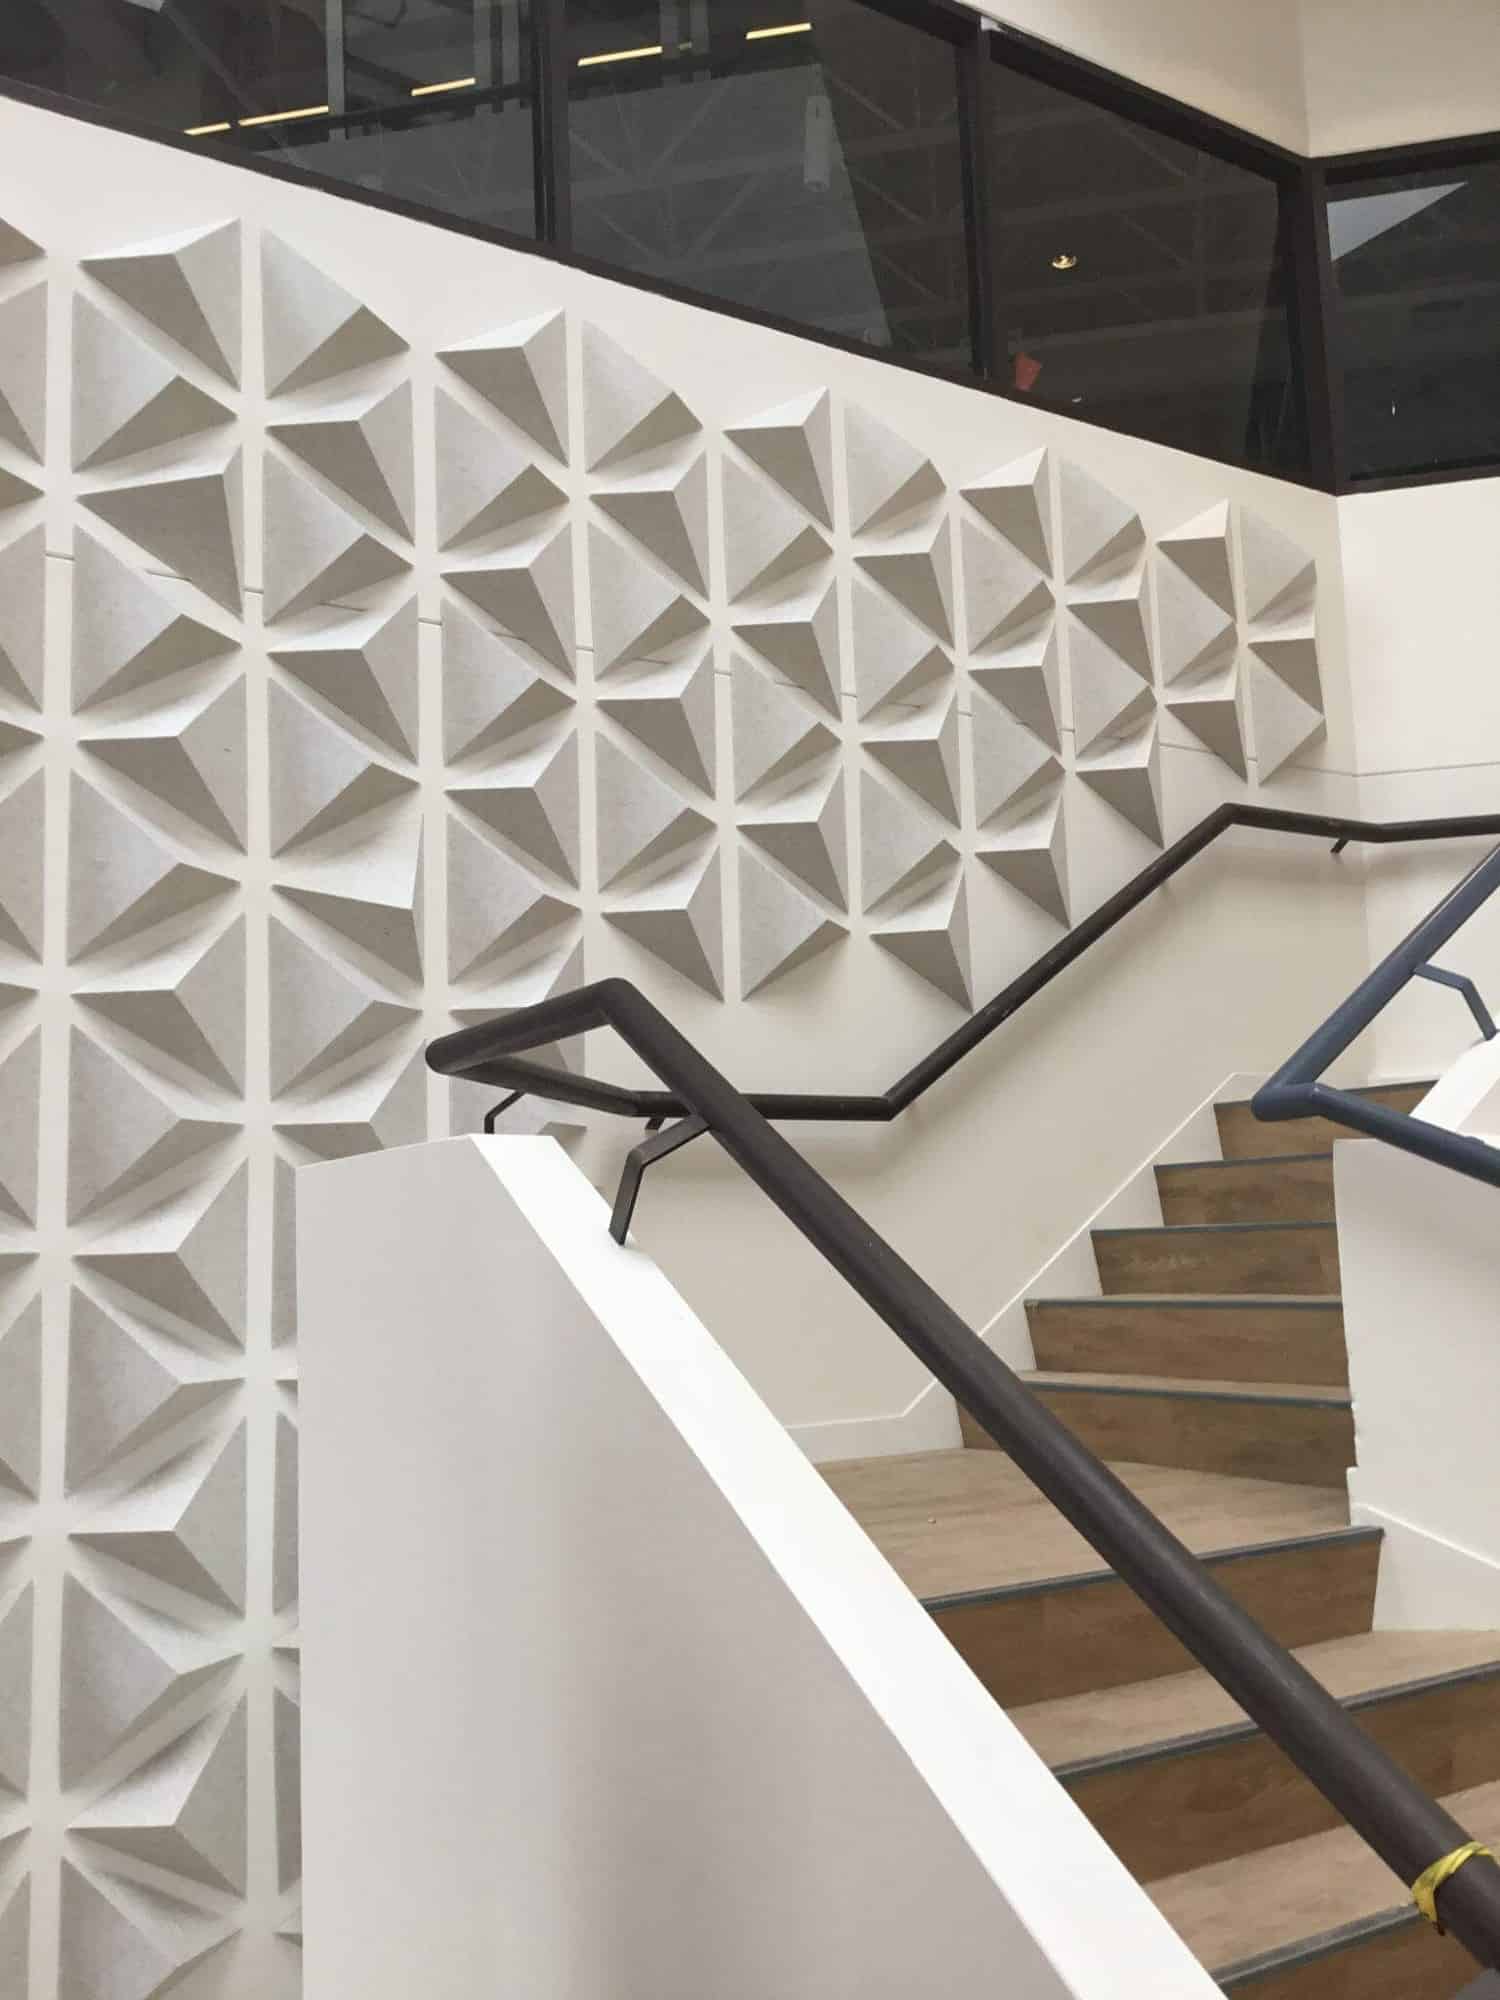 Acoustic panels in a stairwell.